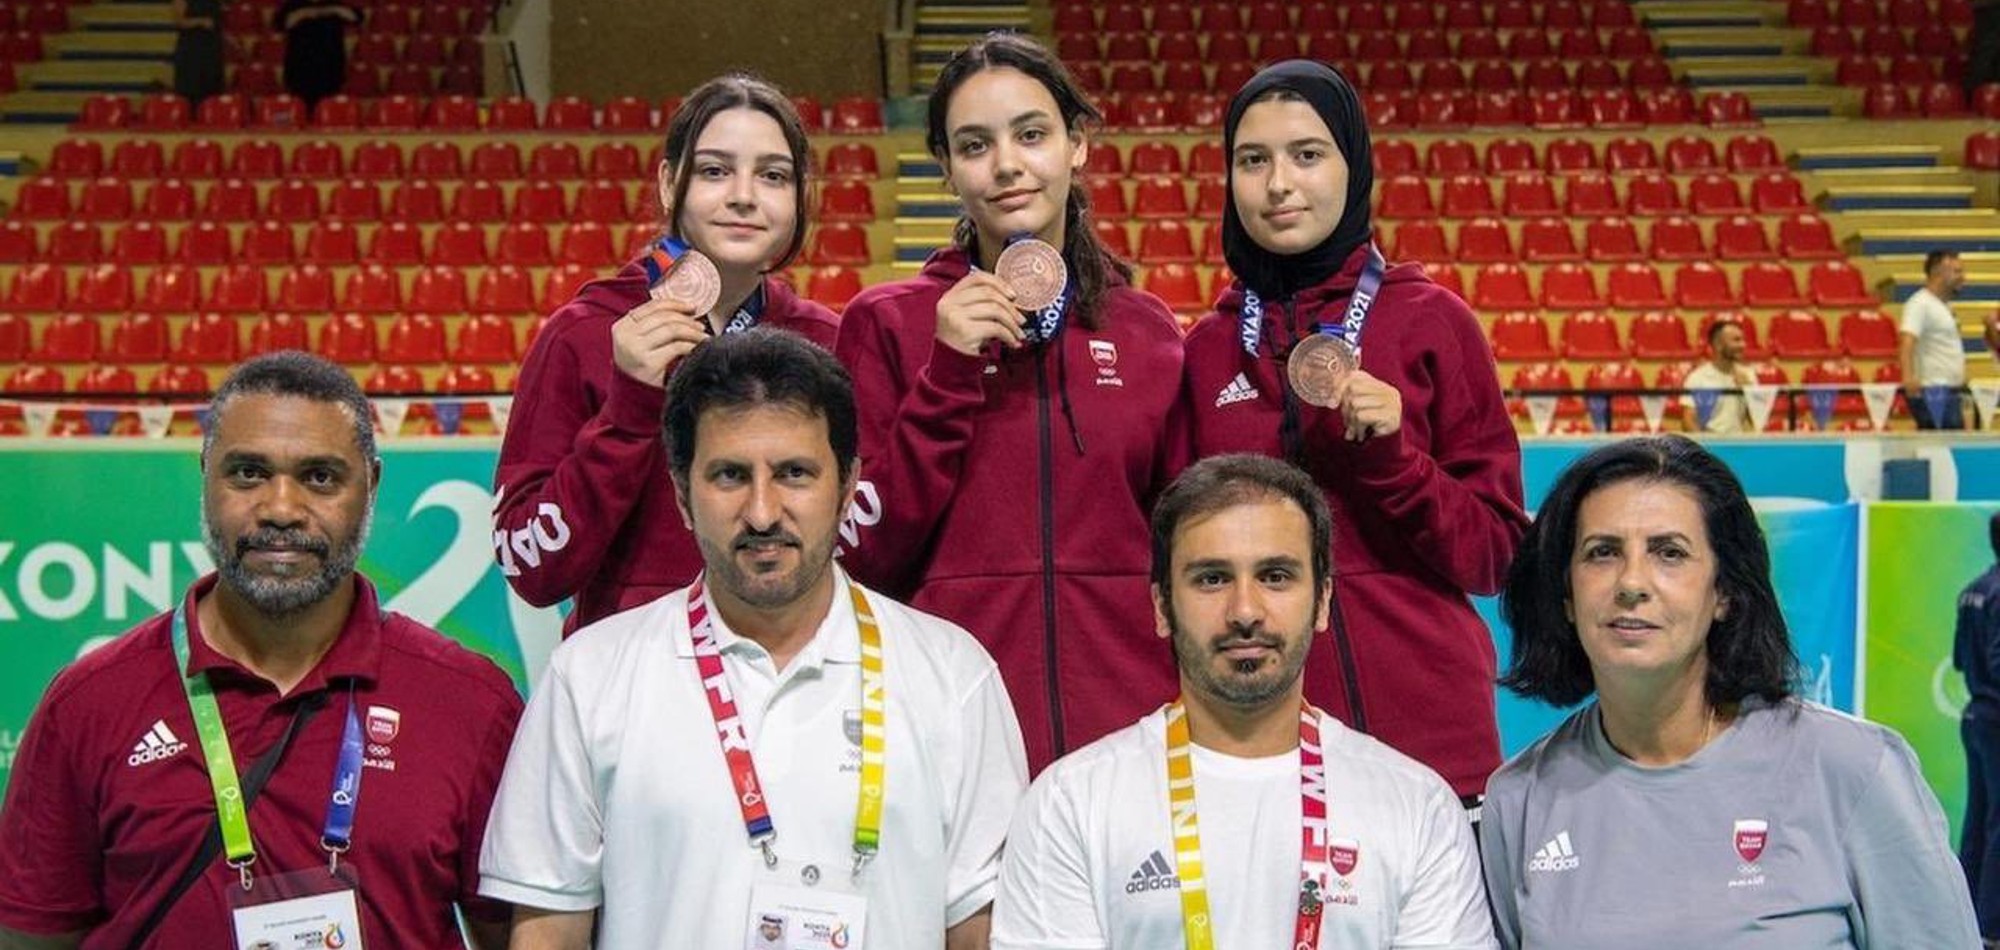 Team Qatar fencers claim another bronze medal at Islamic Solidarity Games